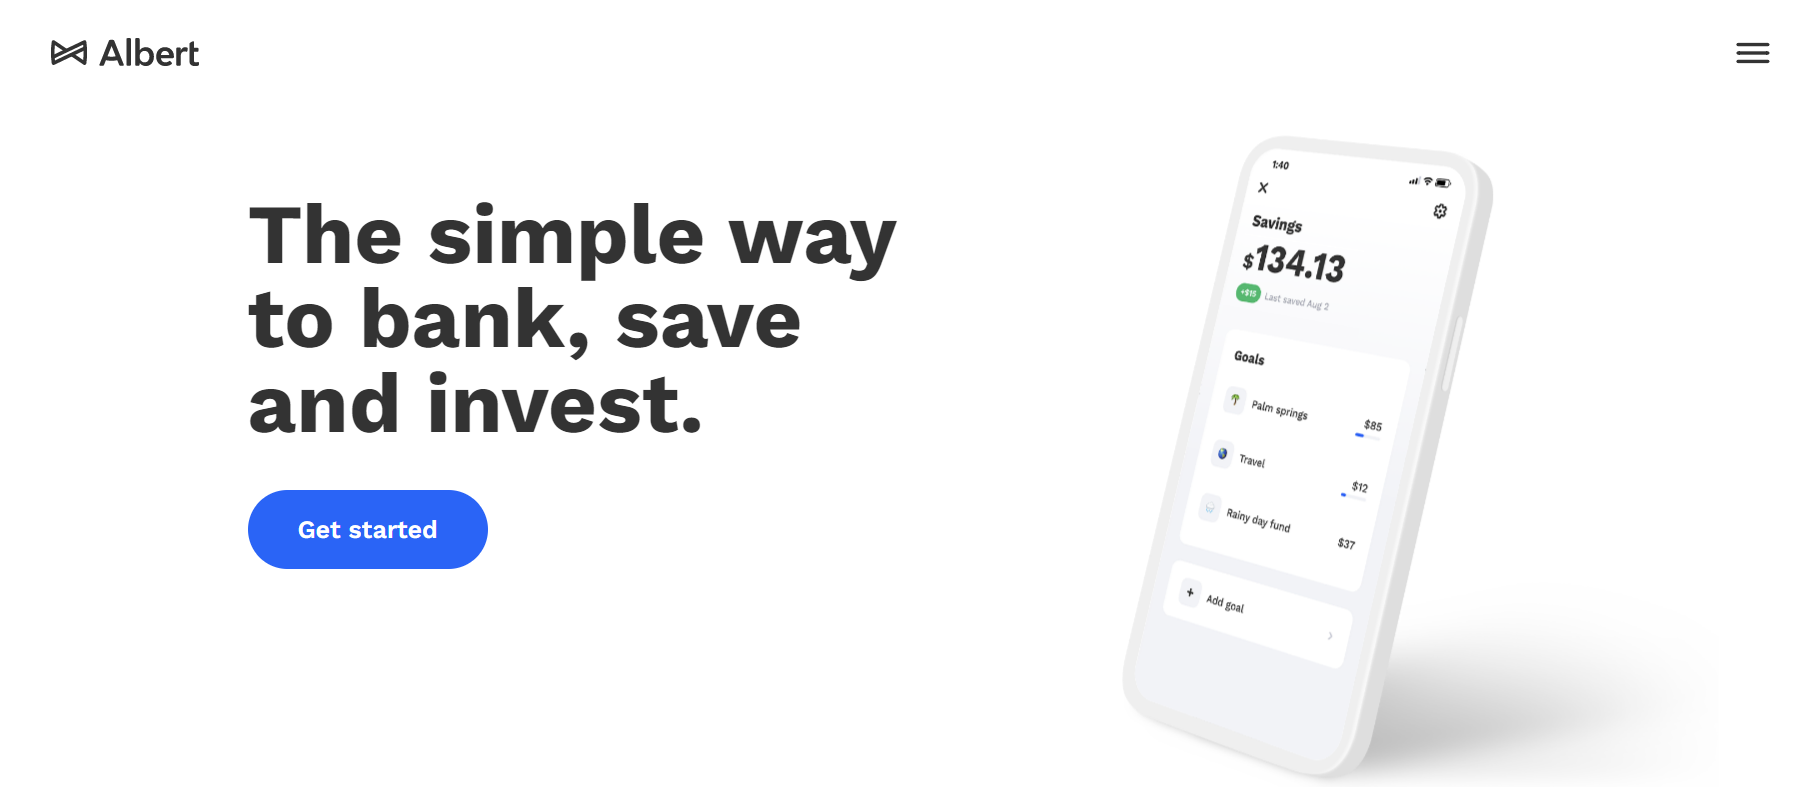 Founded in 2015, Albert is a financial service startup that offers a simple way to track your finances as well as personalized recommendations aimed at boosting your overall financial standing. 